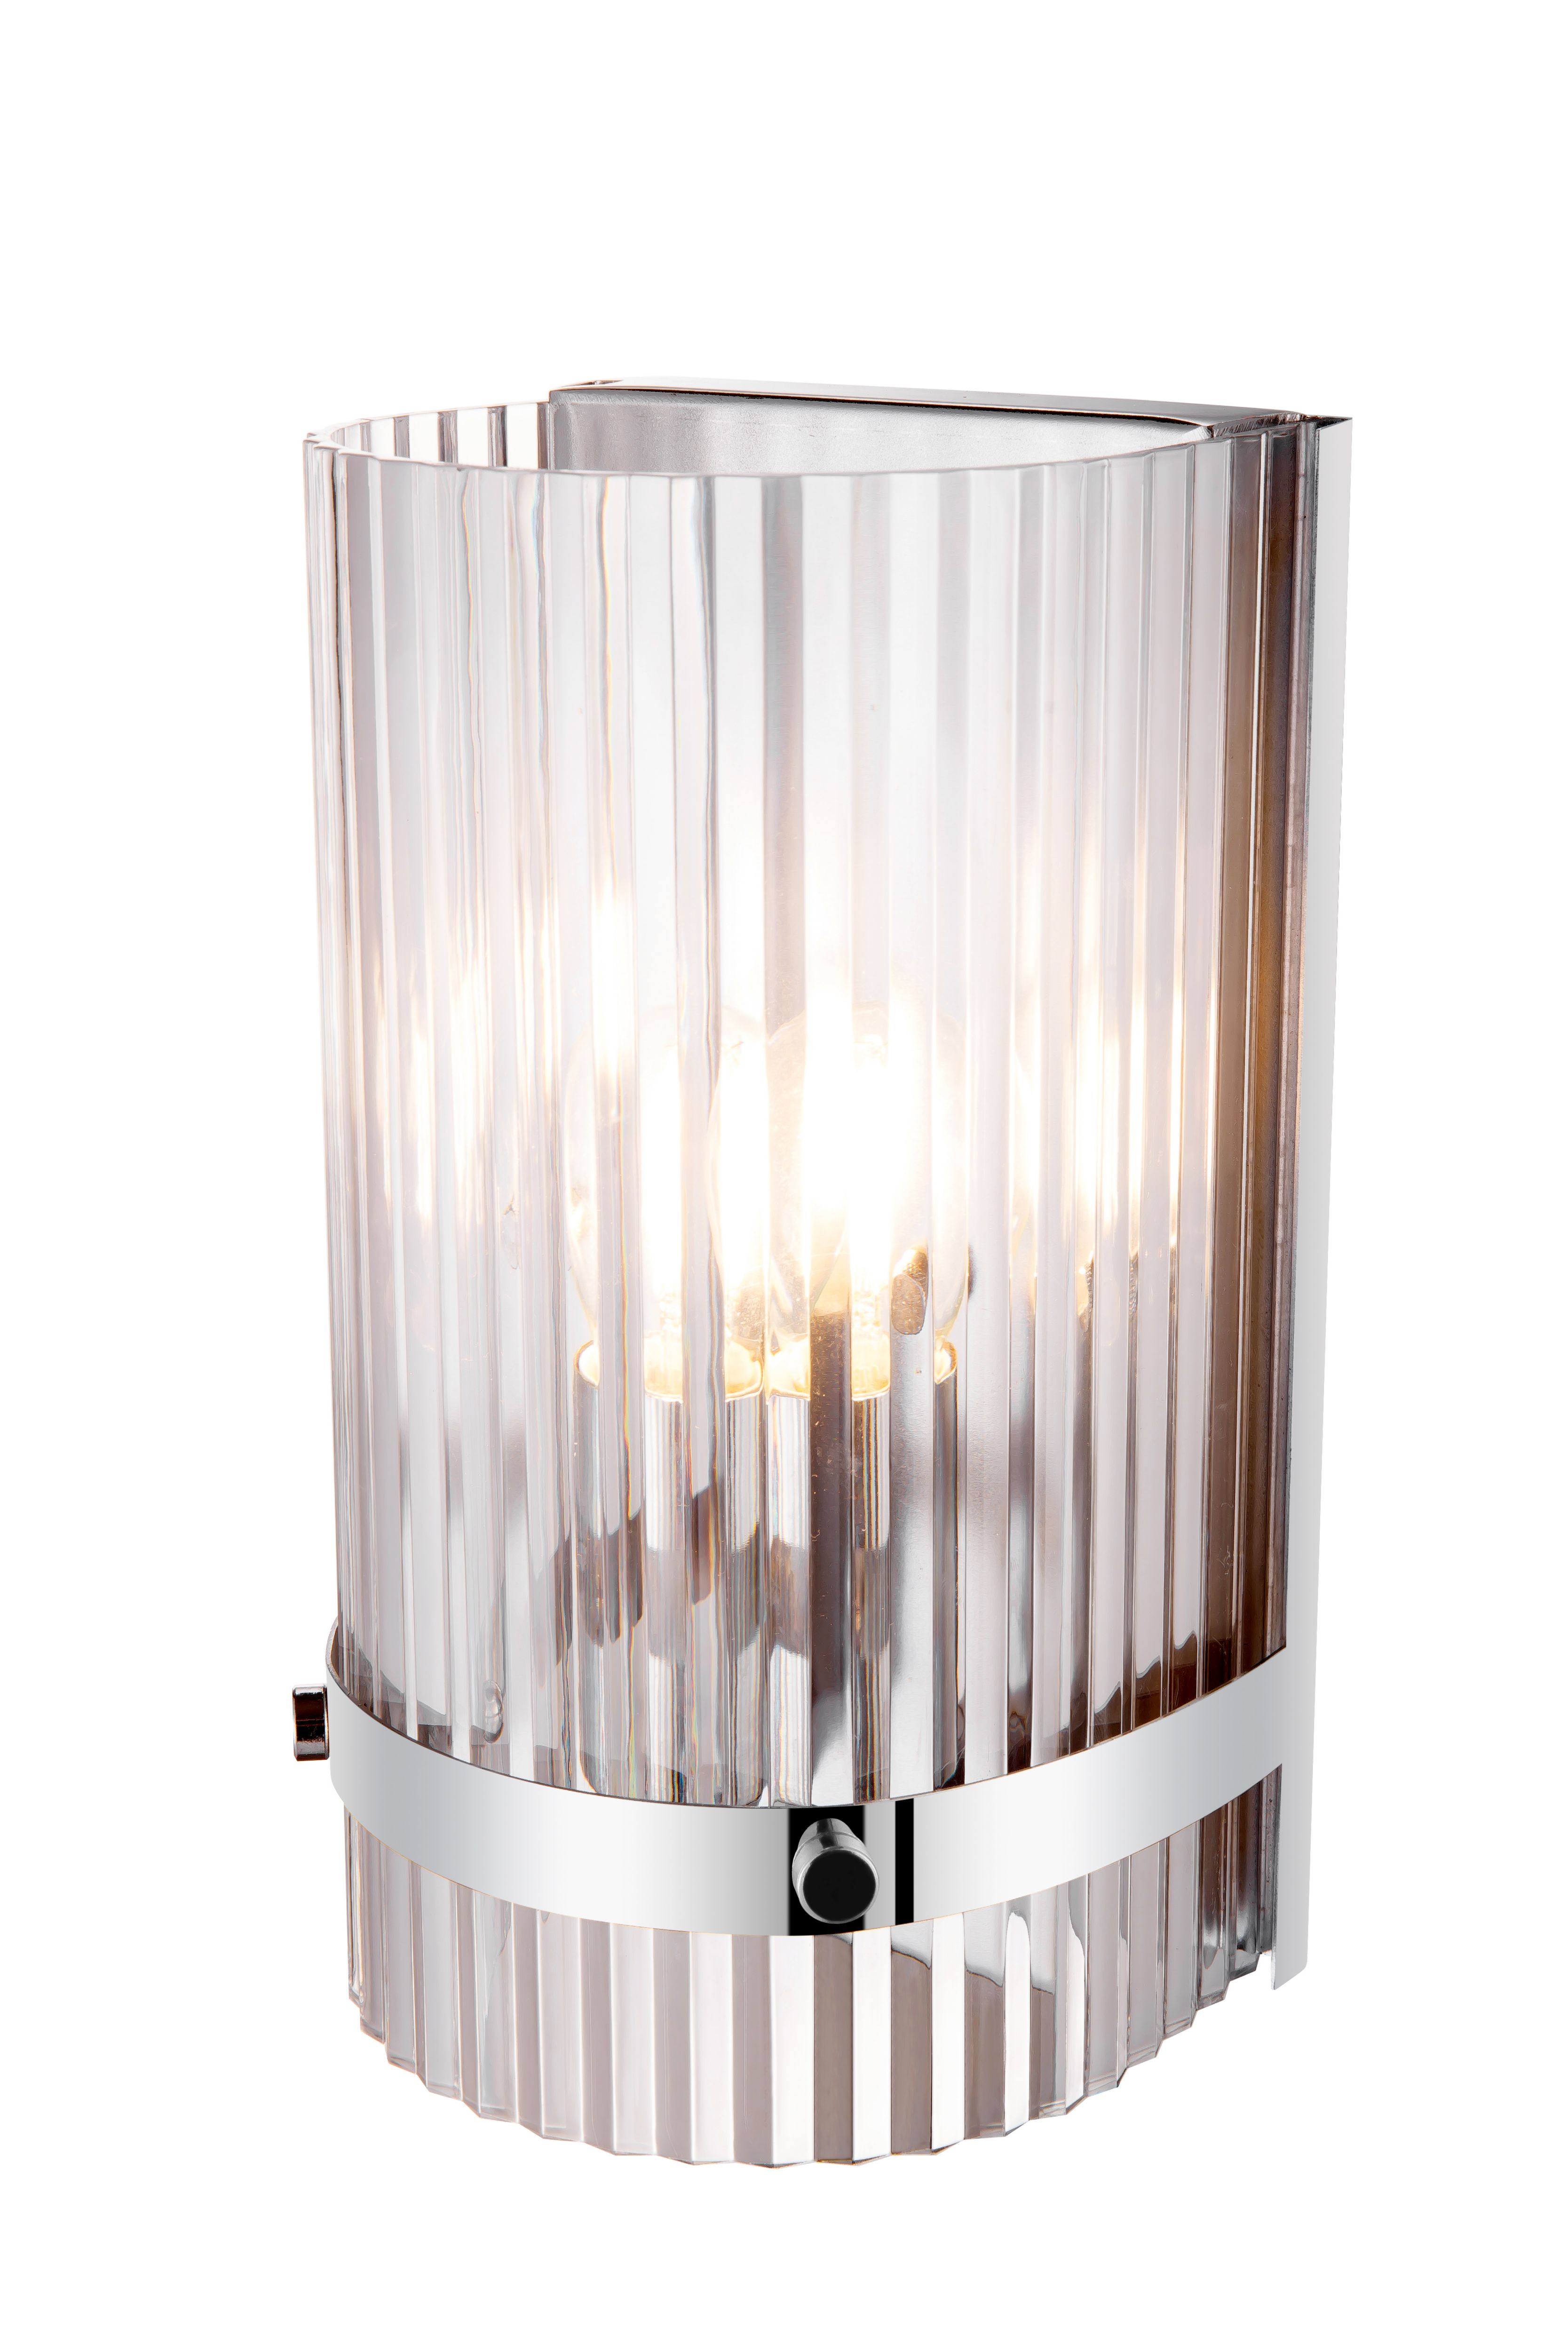 GoodHome Rhyolit Ribbed Chrome effect Wall light